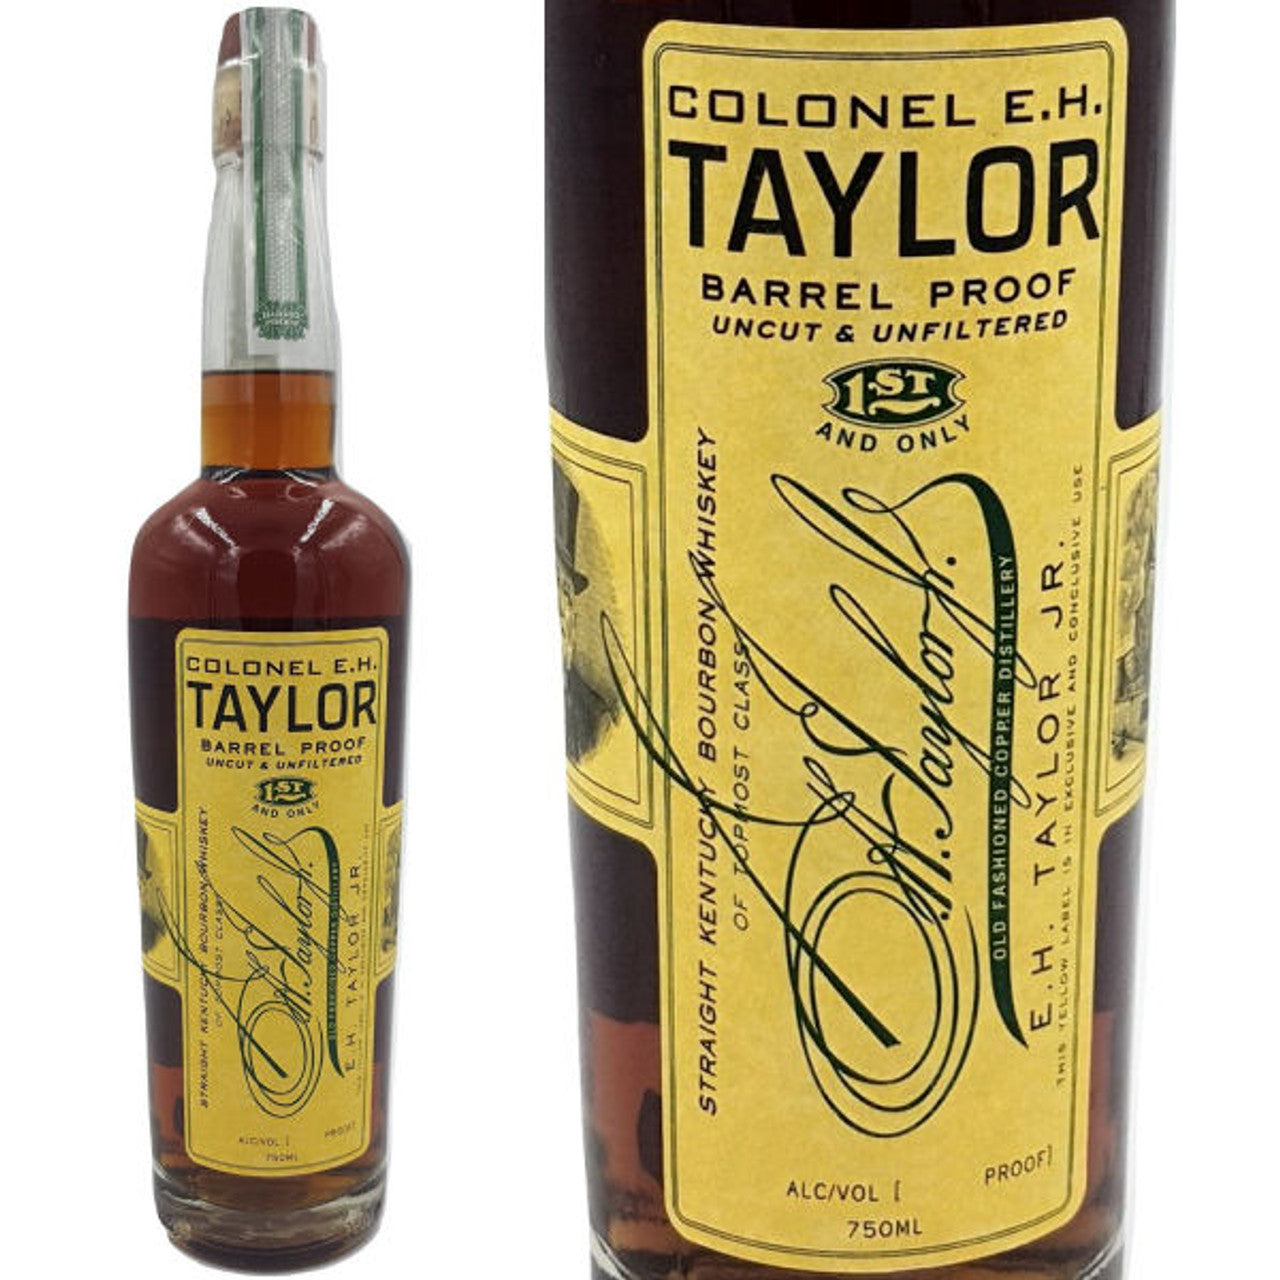 Colonel E.H. Taylor Barrel Proof Uncut & Unfiltered Kentucky Straight Bourbon Whiskey 750ml